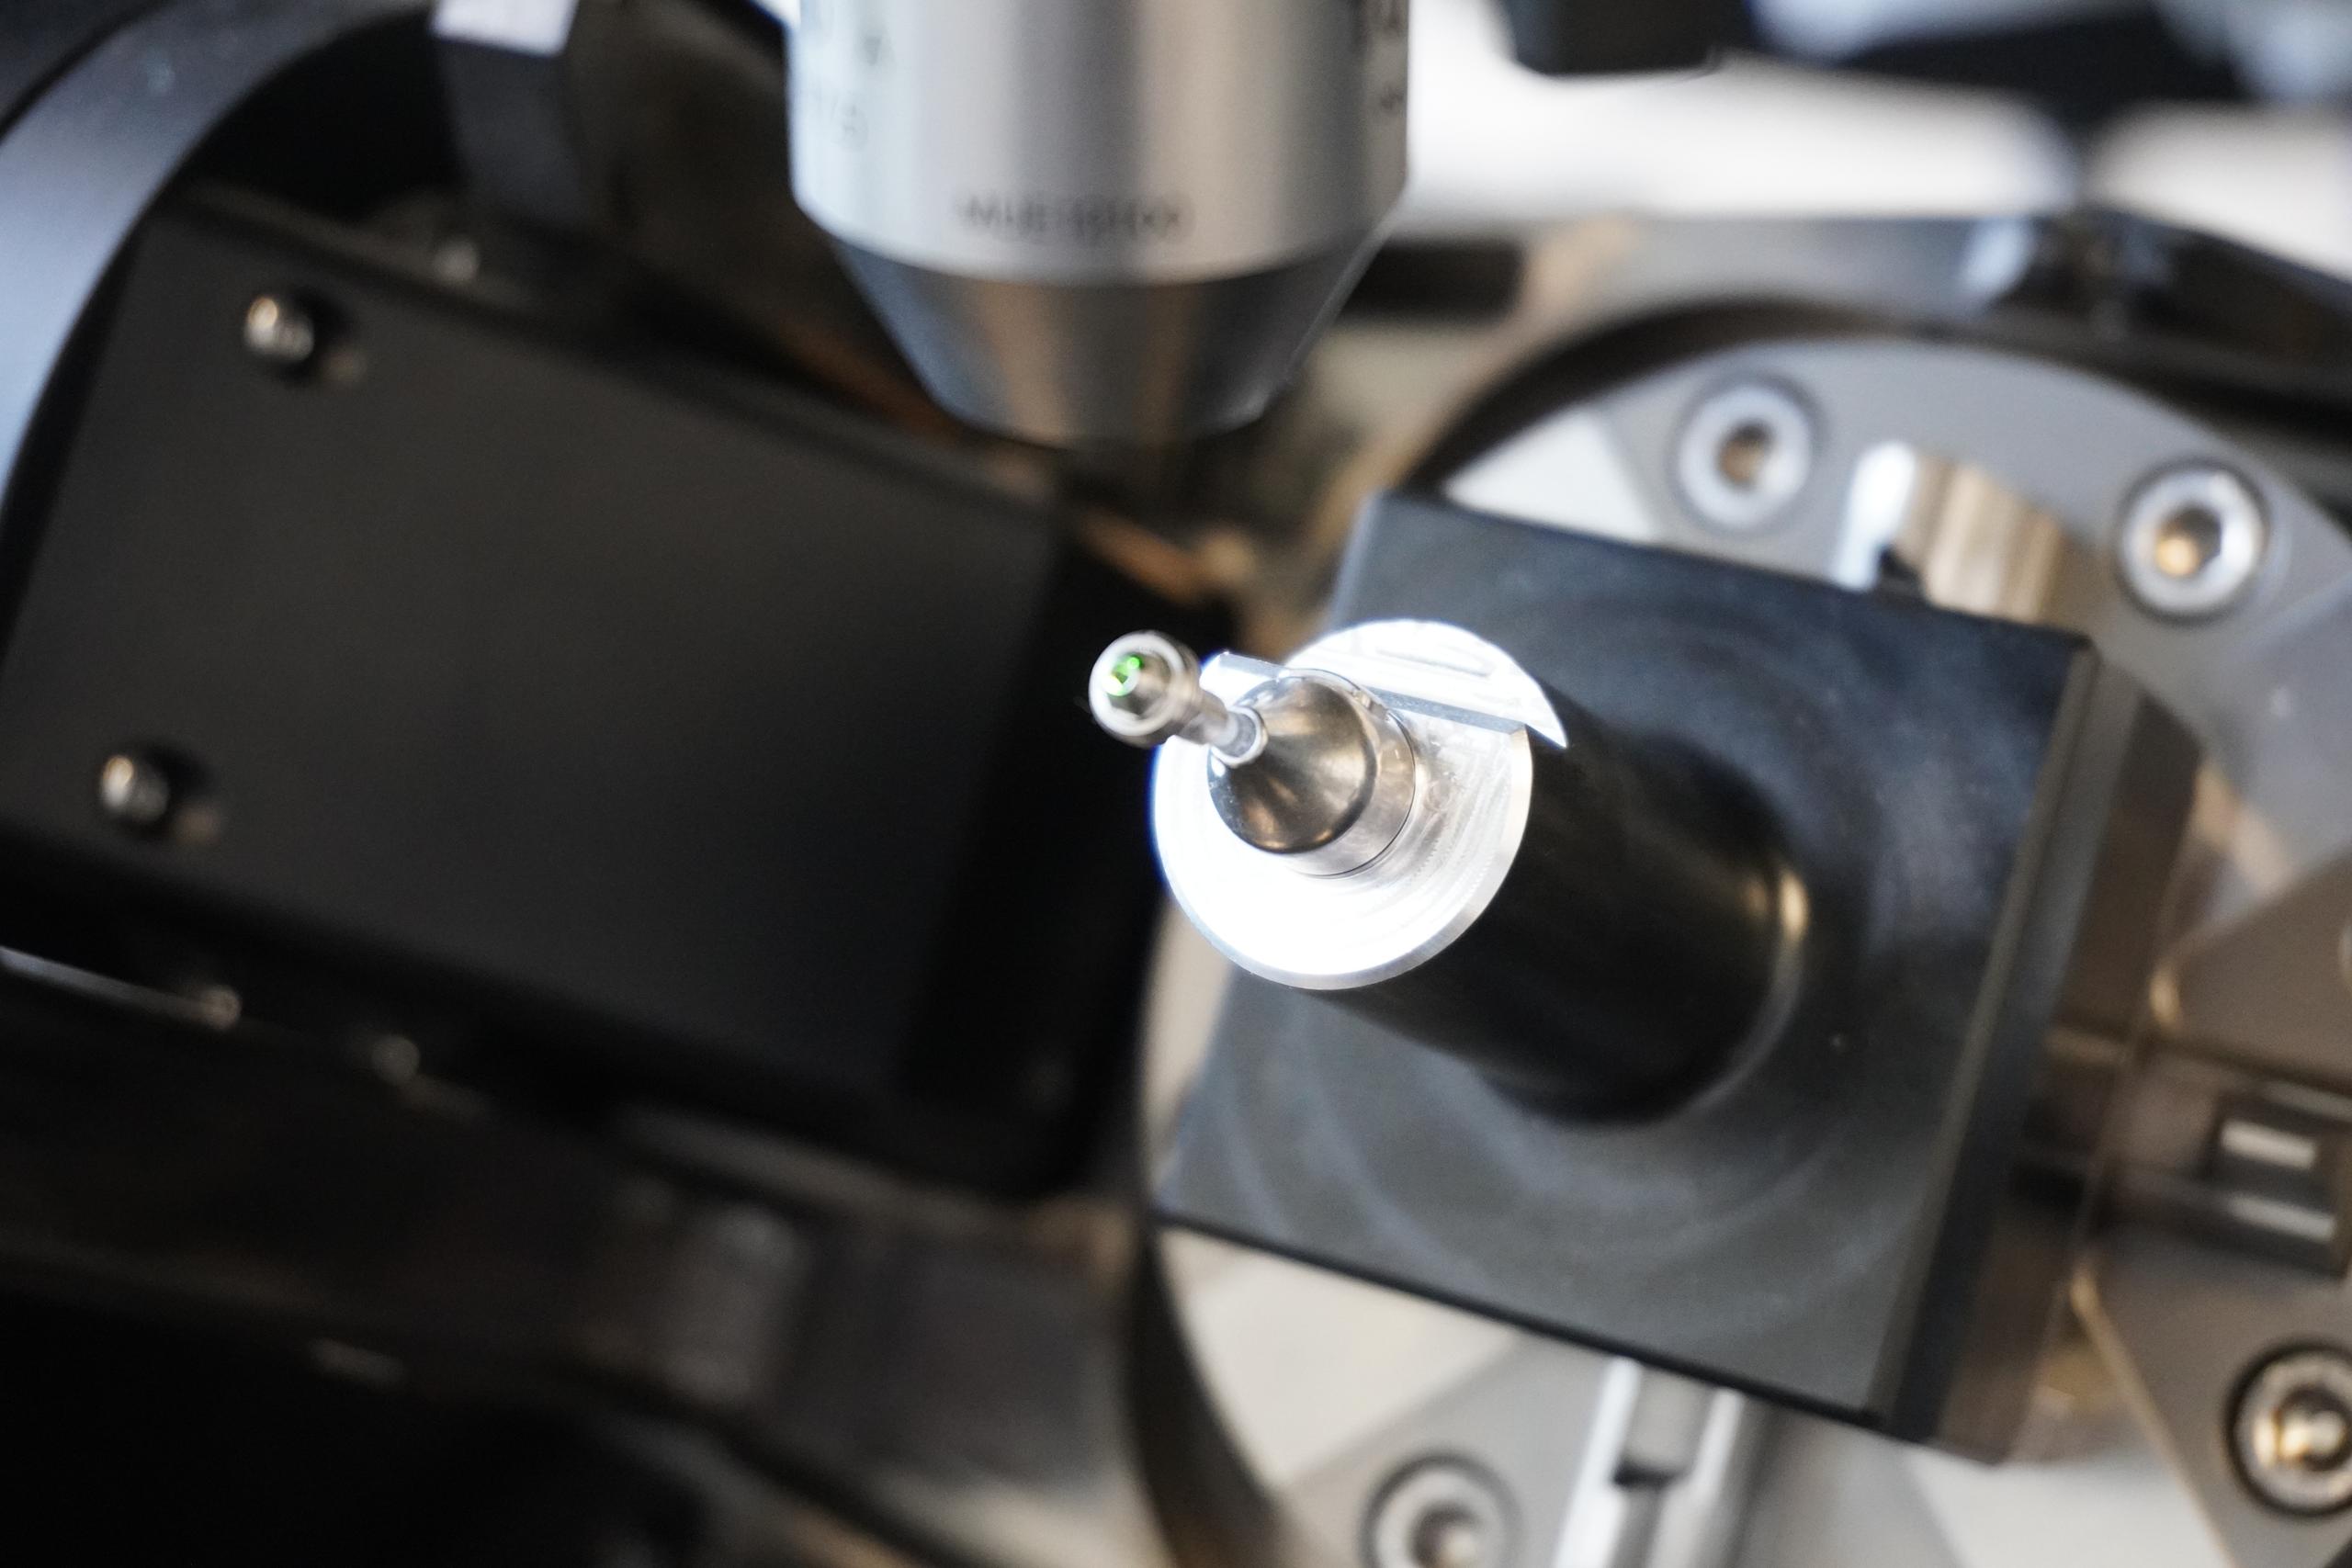 accurate and precise measurement in the µm-range